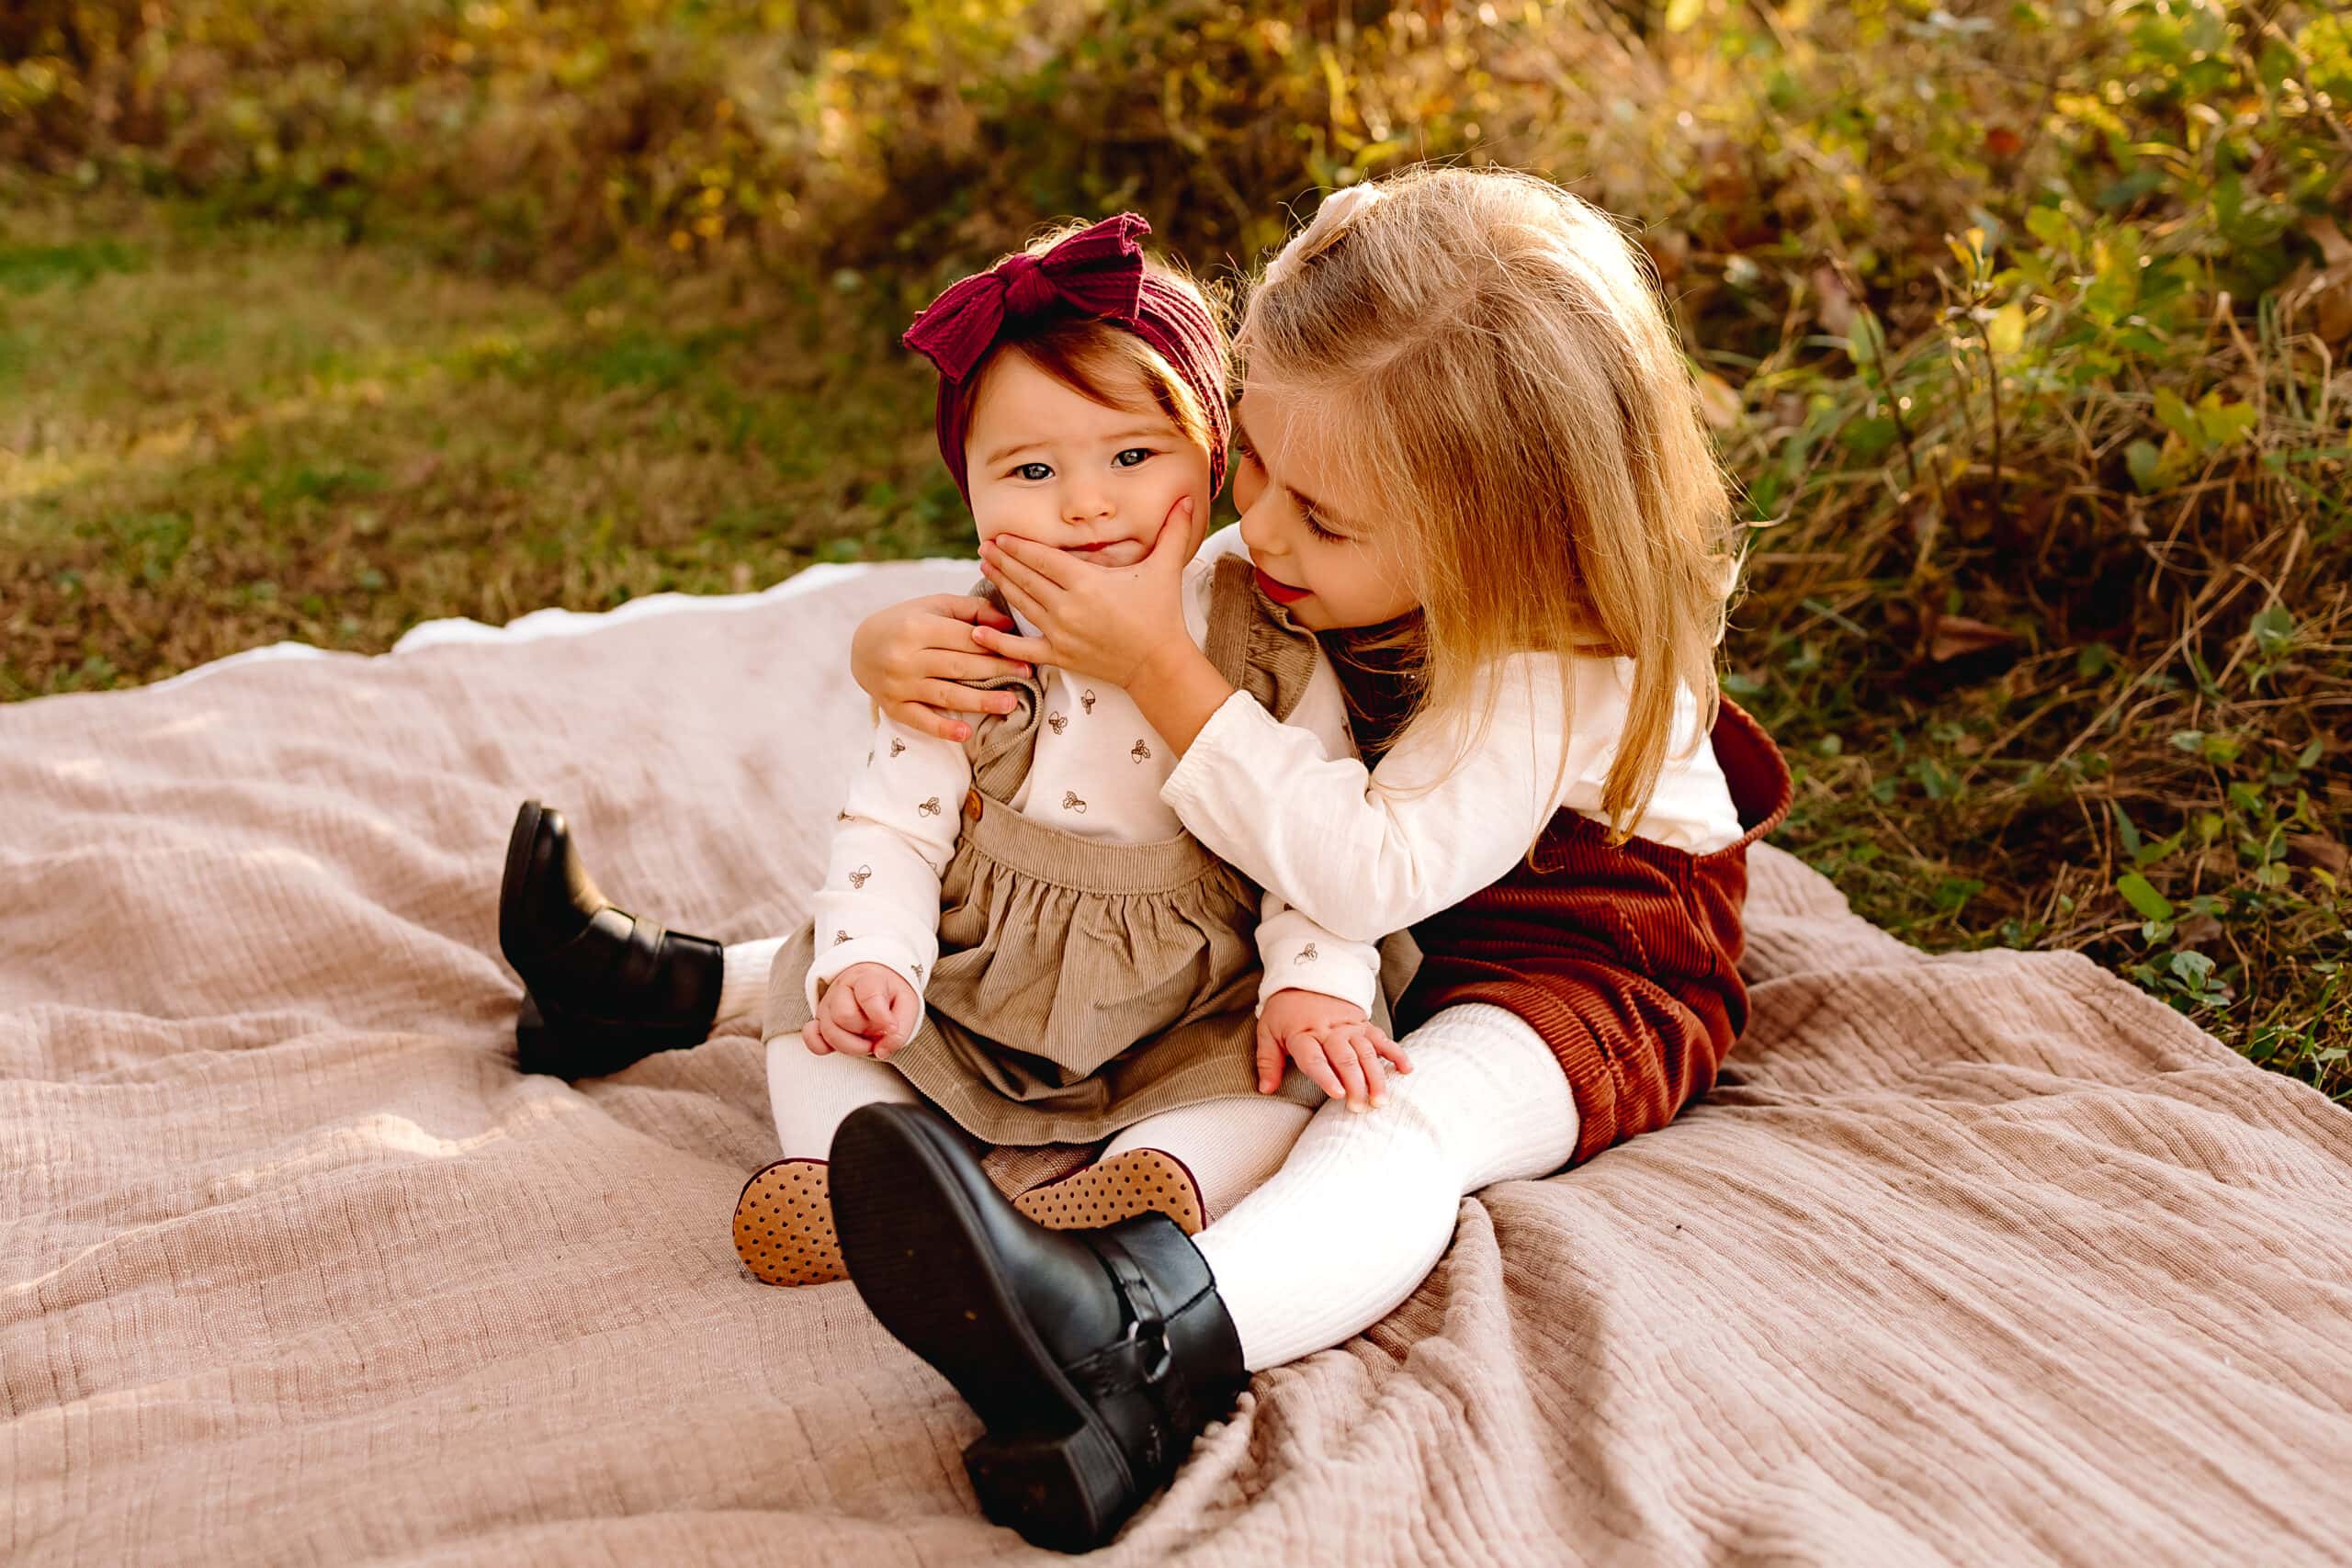 Sisters sitting on a blanket in a grassy field, the toddler is squishing the baby's cheeks.